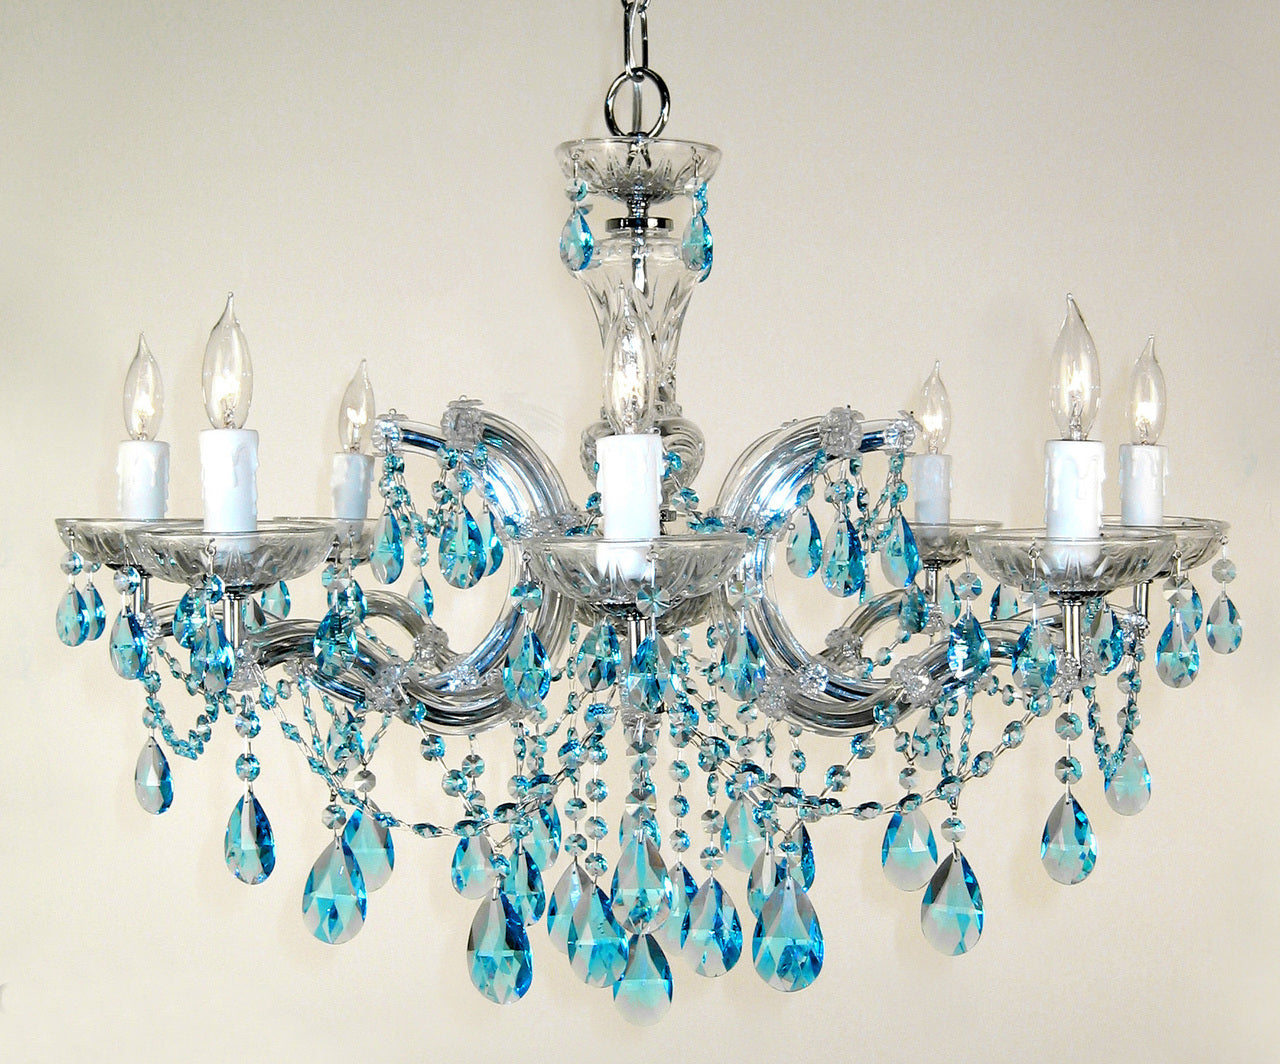 Classic Lighting 8348 CH CSA Rialto Traditional Crystal Chandelier in Chrome